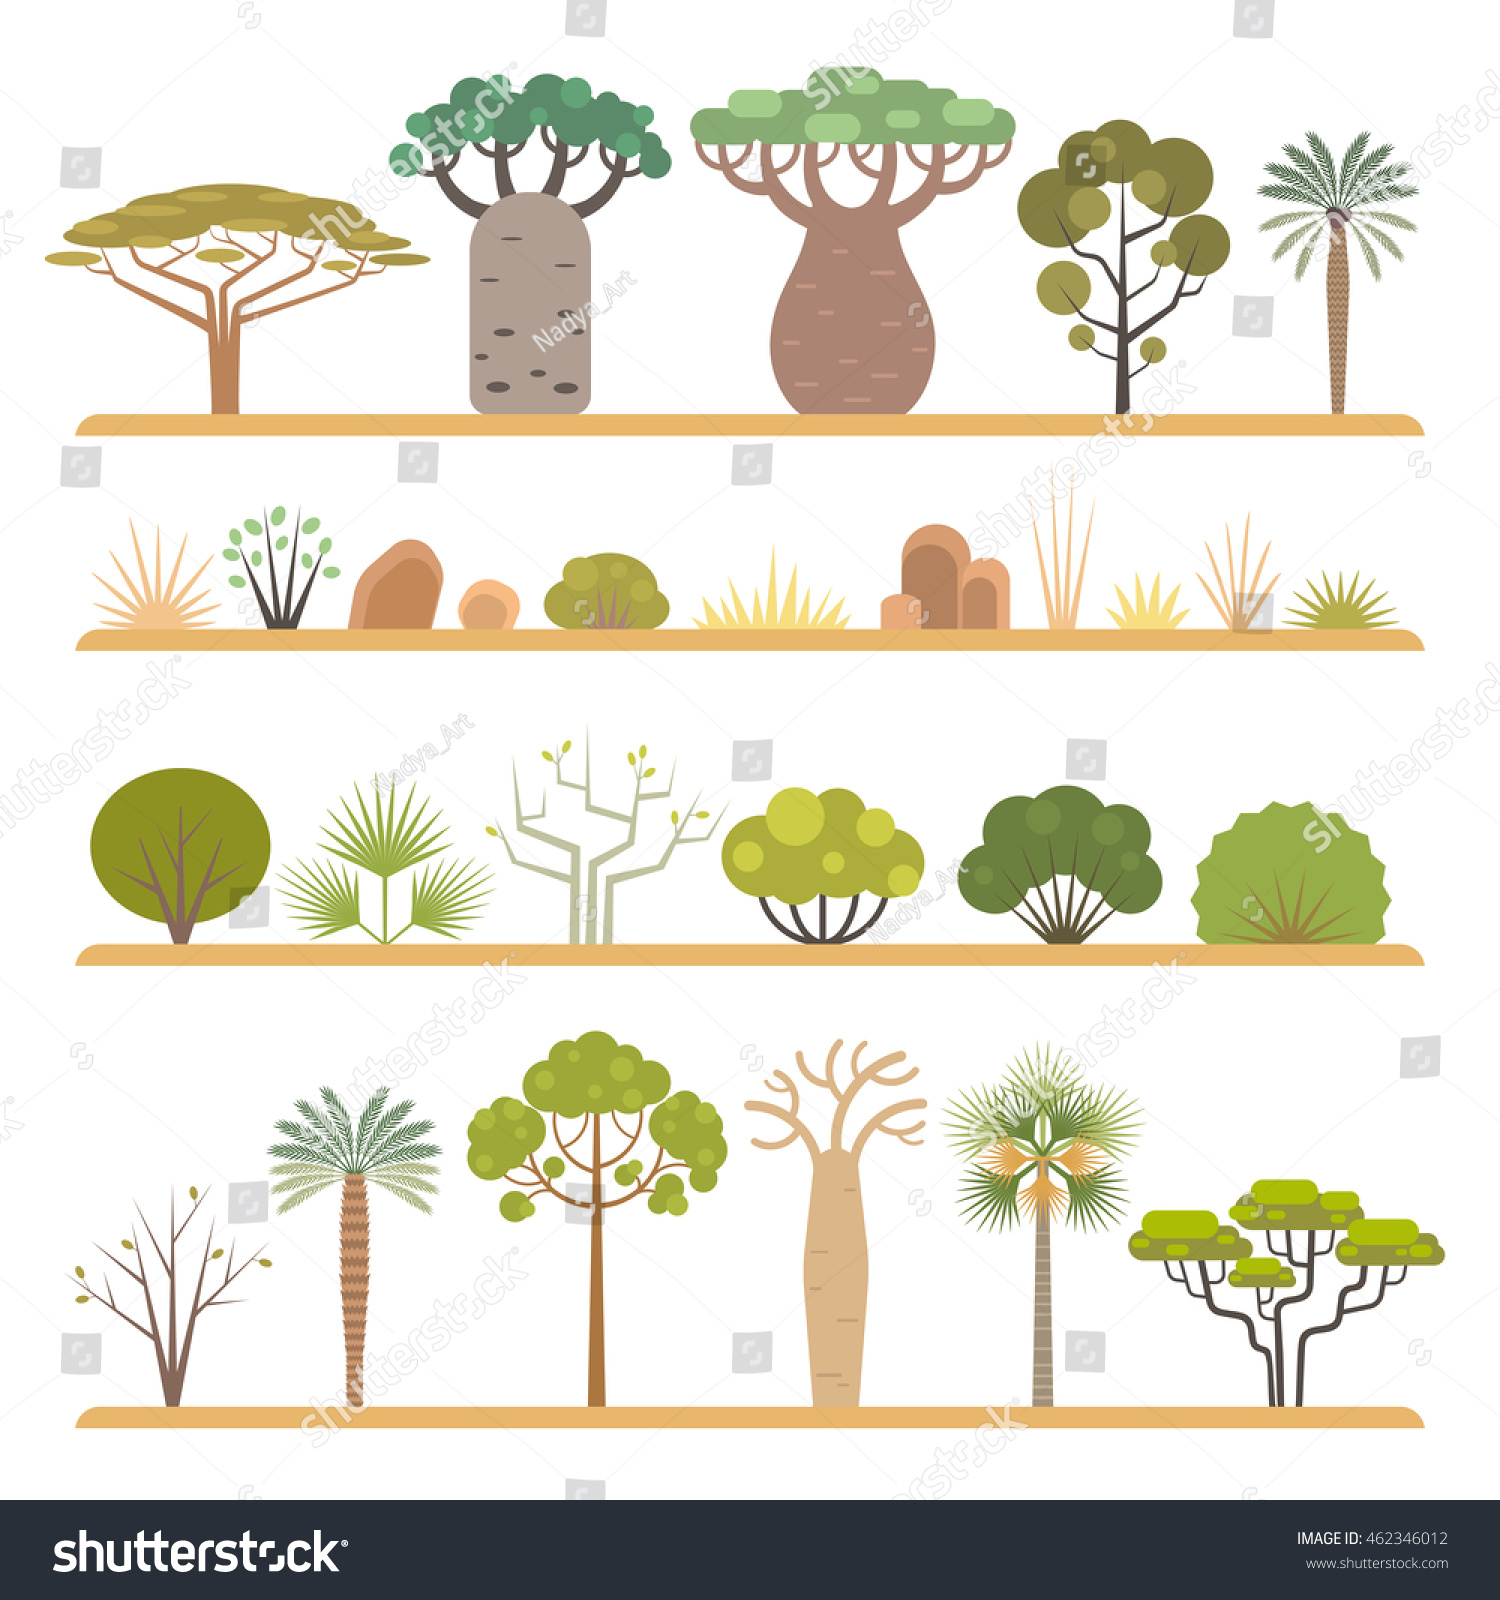 SVG of Set of flat African flora elements: different types of trees, grass and bushes, isolated on white background. svg